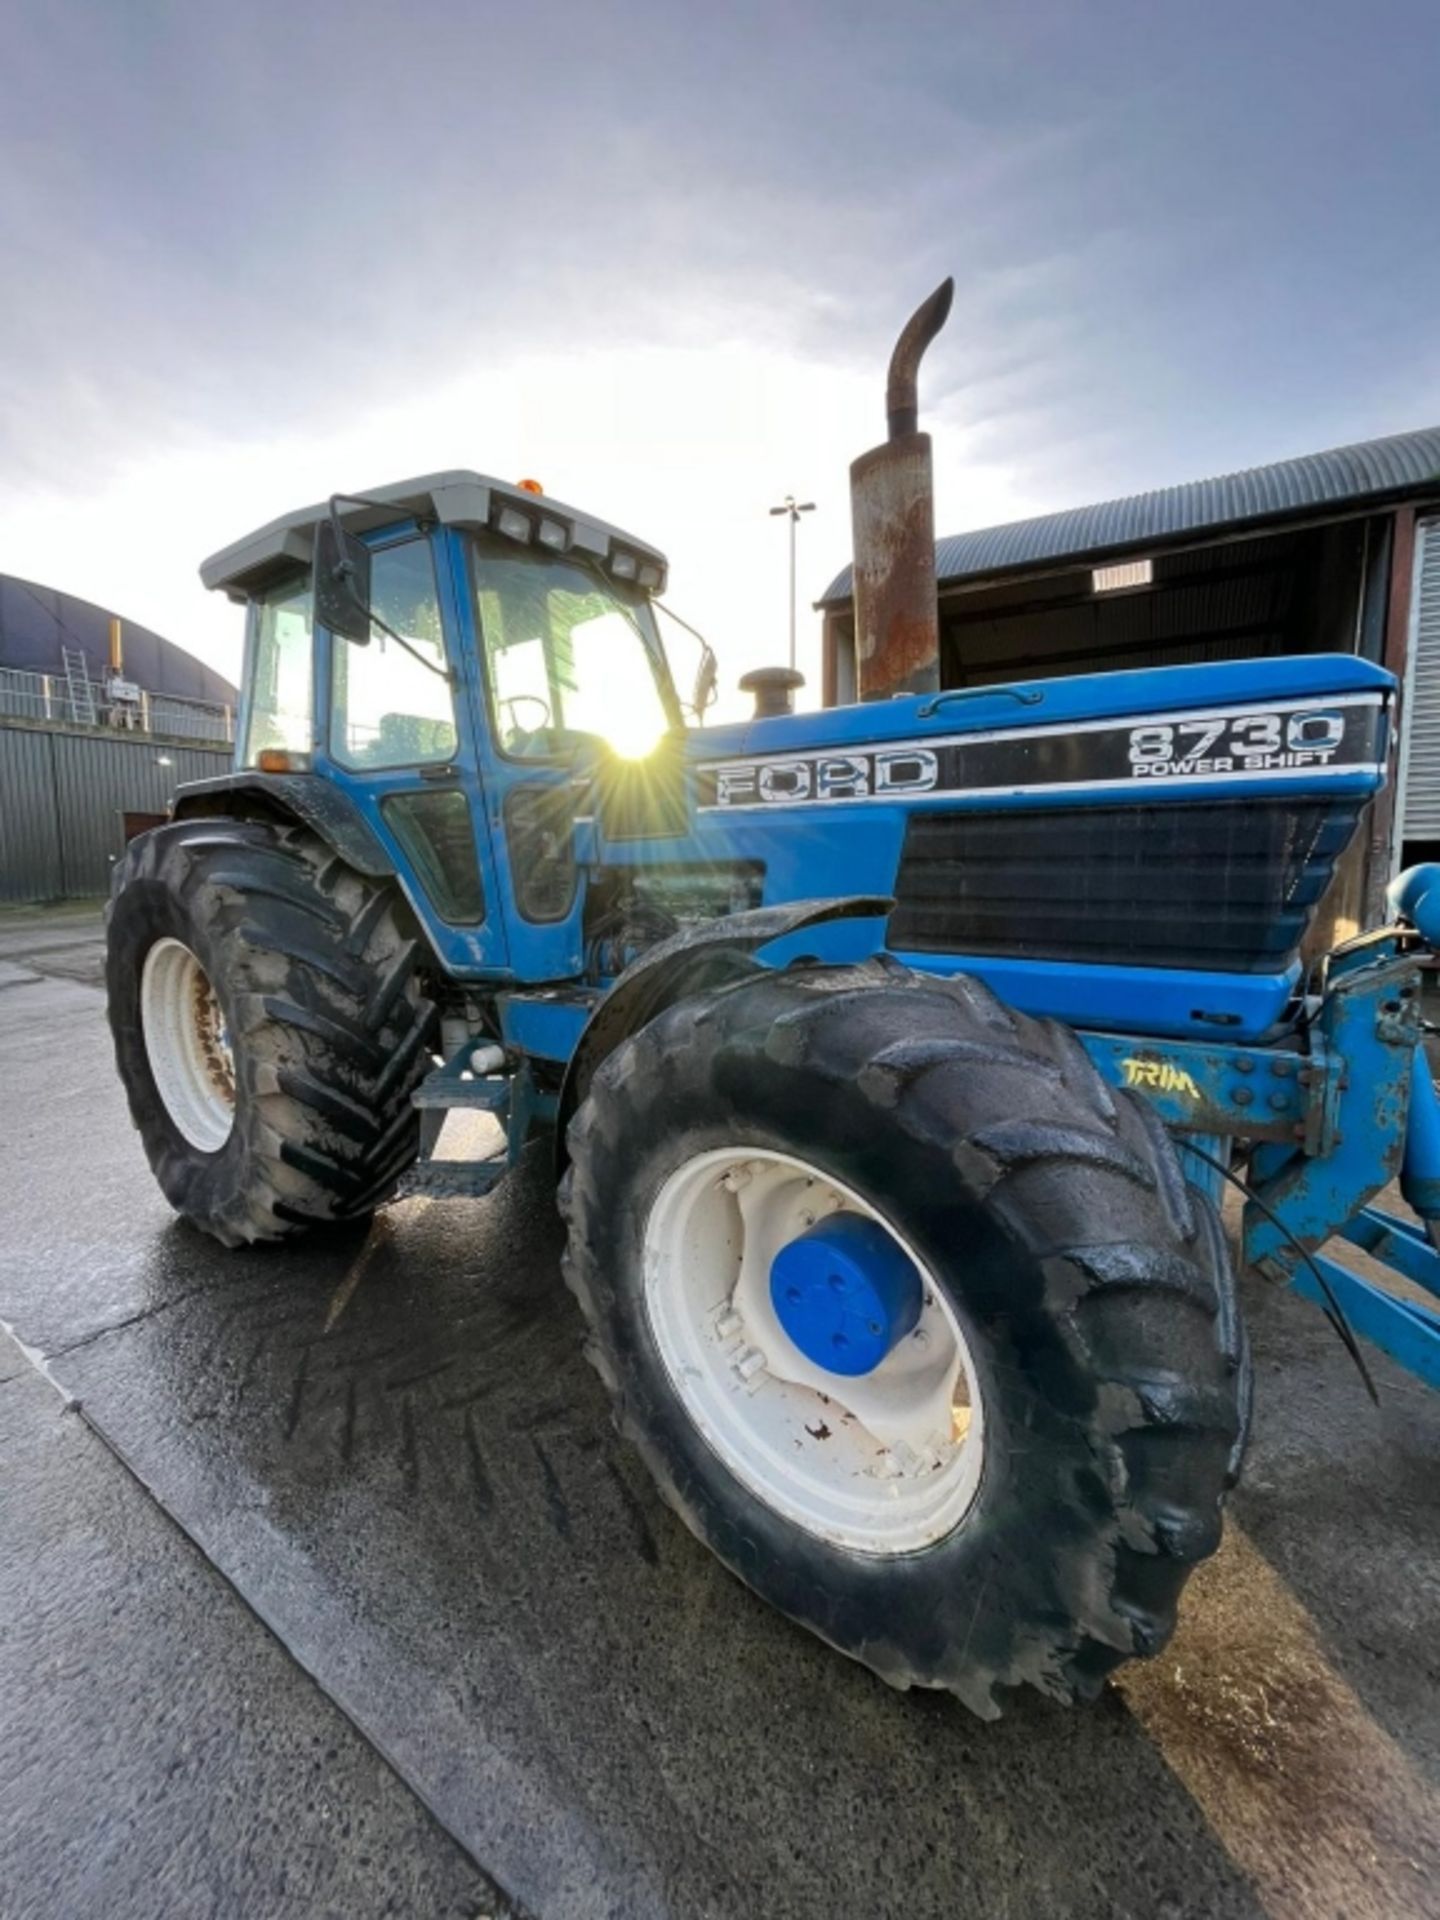 FORD 8730 POWERSHIFT TRACTOR